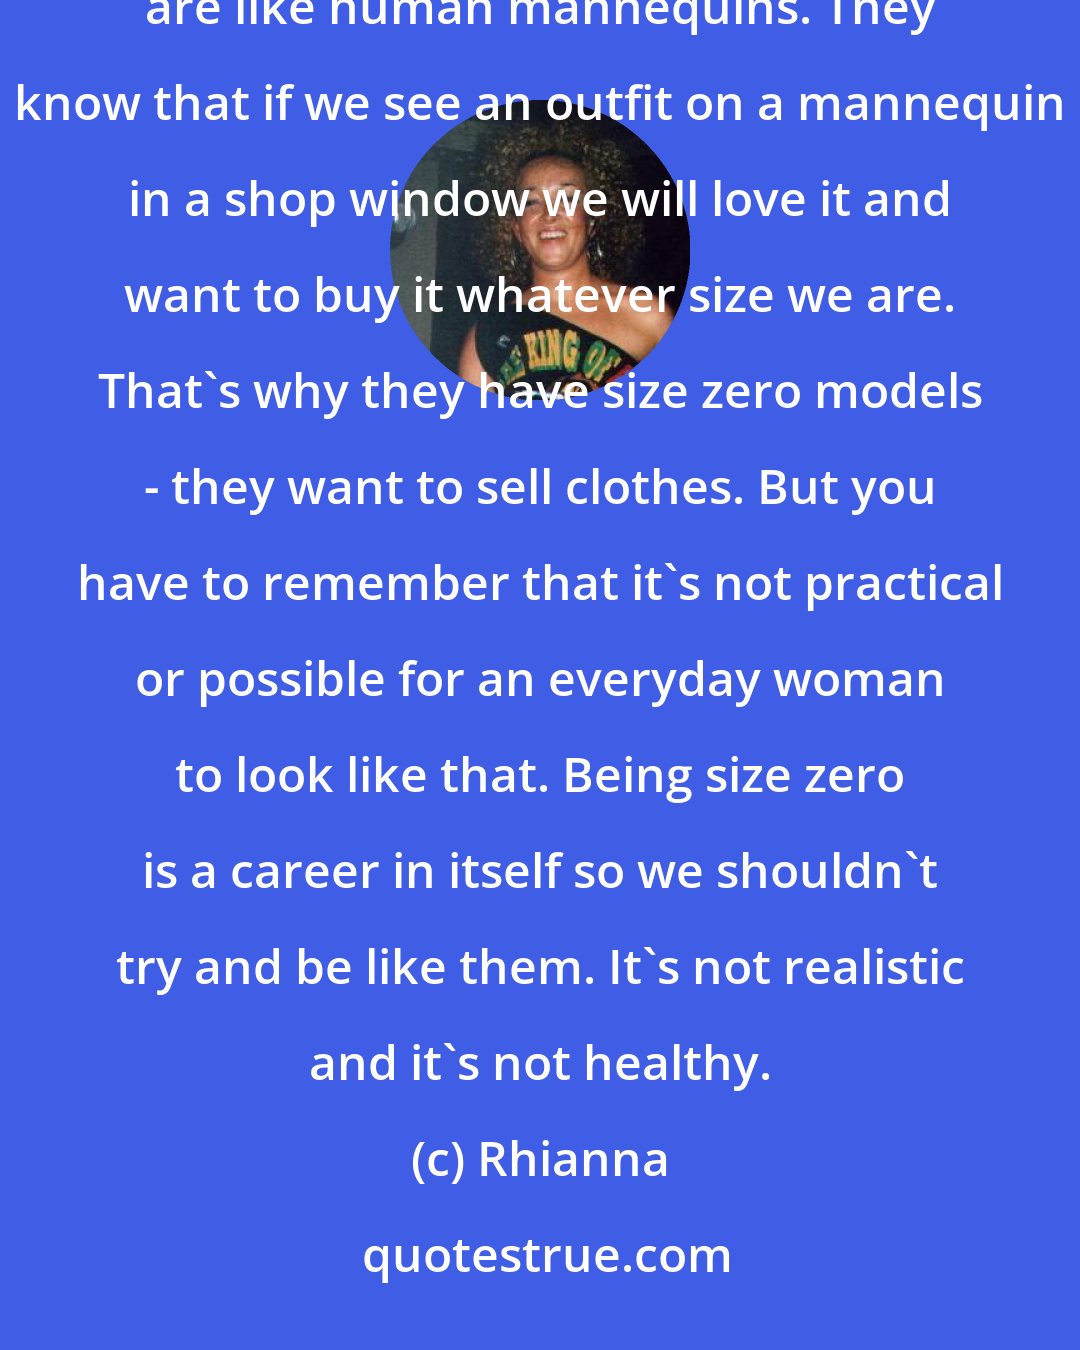 Rhianna: You shouldn't be pressured into trying to be thin by the fashion industry, because they only want models that are like human mannequins. They know that if we see an outfit on a mannequin in a shop window we will love it and want to buy it whatever size we are. That's why they have size zero models - they want to sell clothes. But you have to remember that it's not practical or possible for an everyday woman to look like that. Being size zero is a career in itself so we shouldn't try and be like them. It's not realistic and it's not healthy.